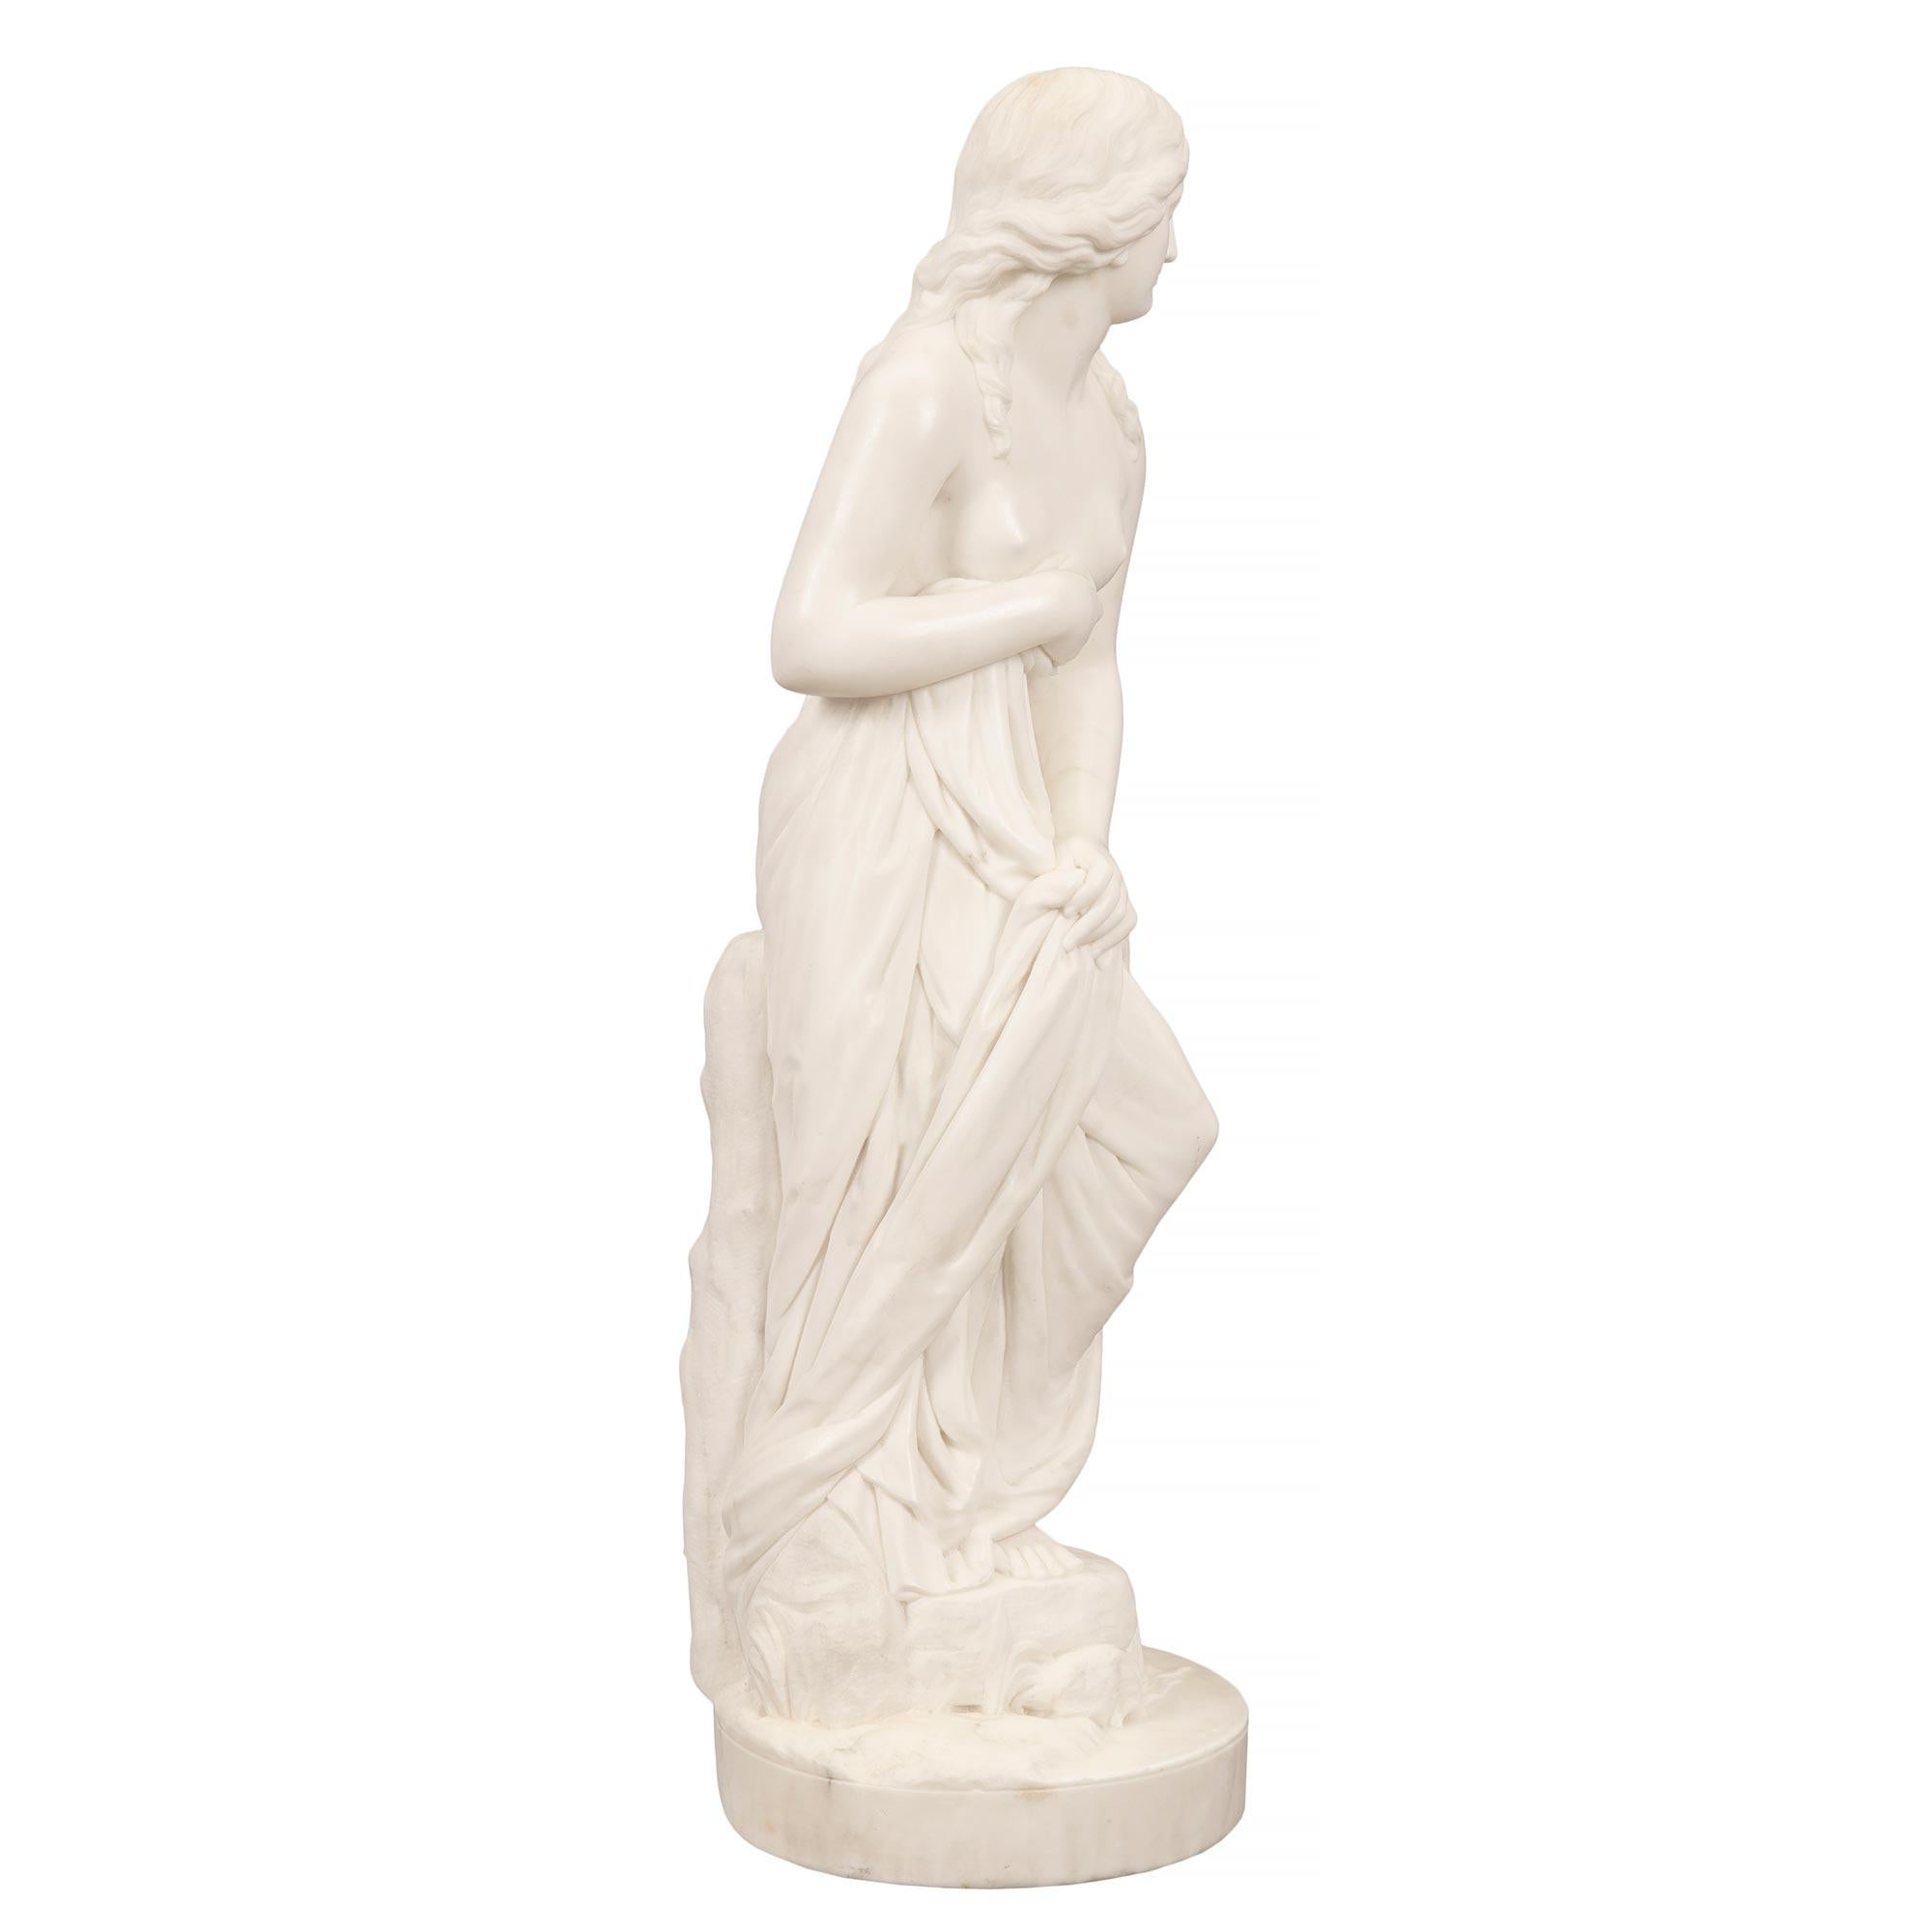 A lovely and finely sculpted Italian 19th century Neo-Classical st. white Carrara marble statue of 